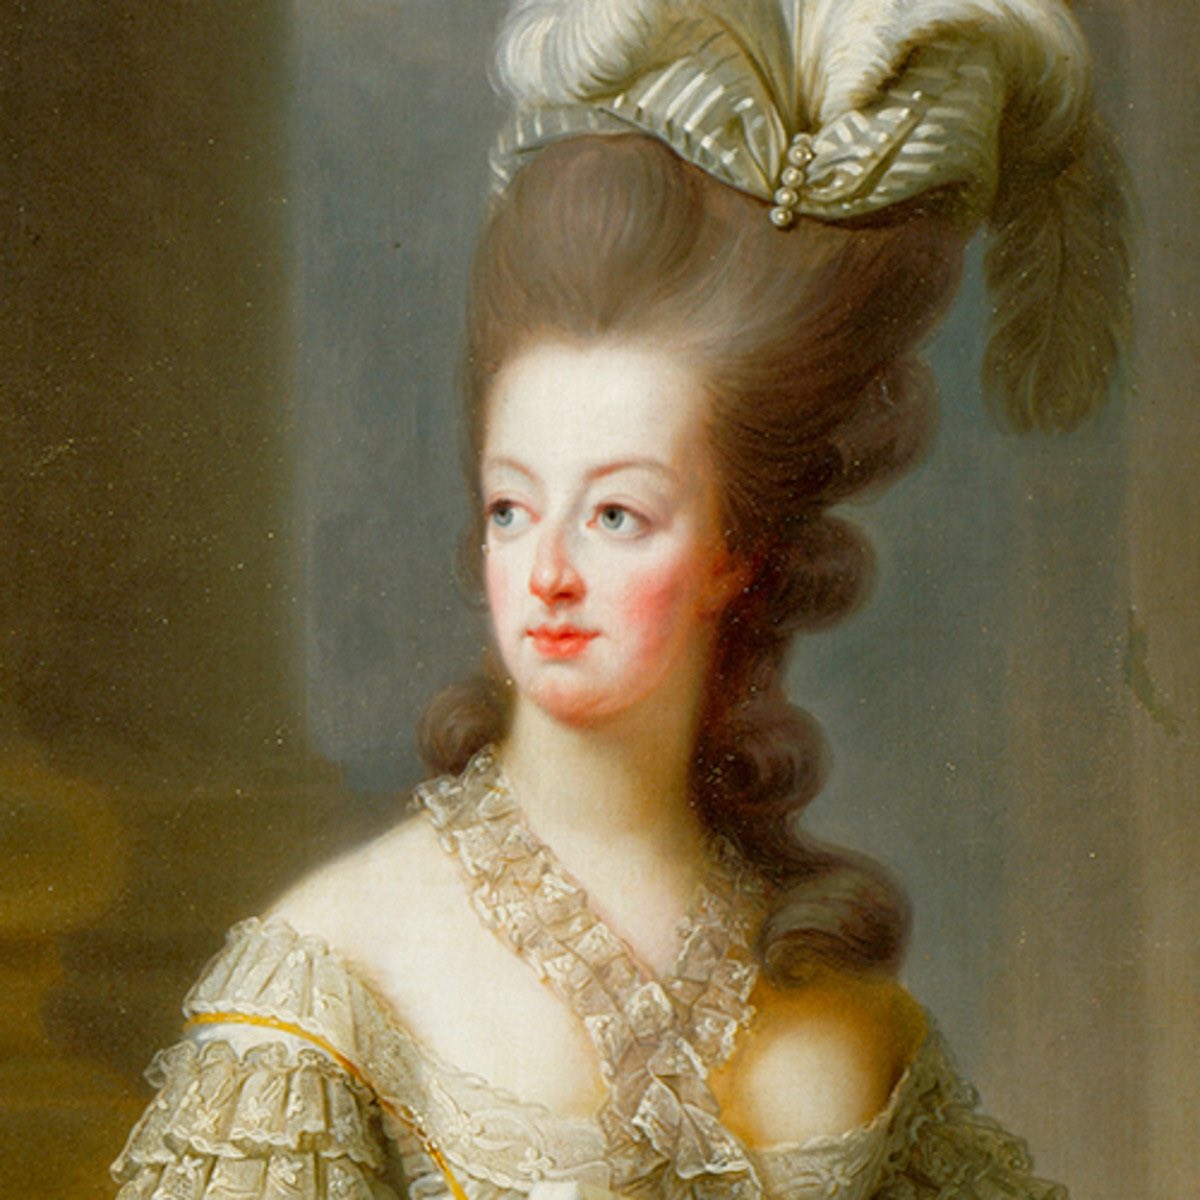 She was also a good friend of Marie Antoinette, who she stuck with even during the French Revolution. Surprisingly enough, they never met in person but they’d write each other often